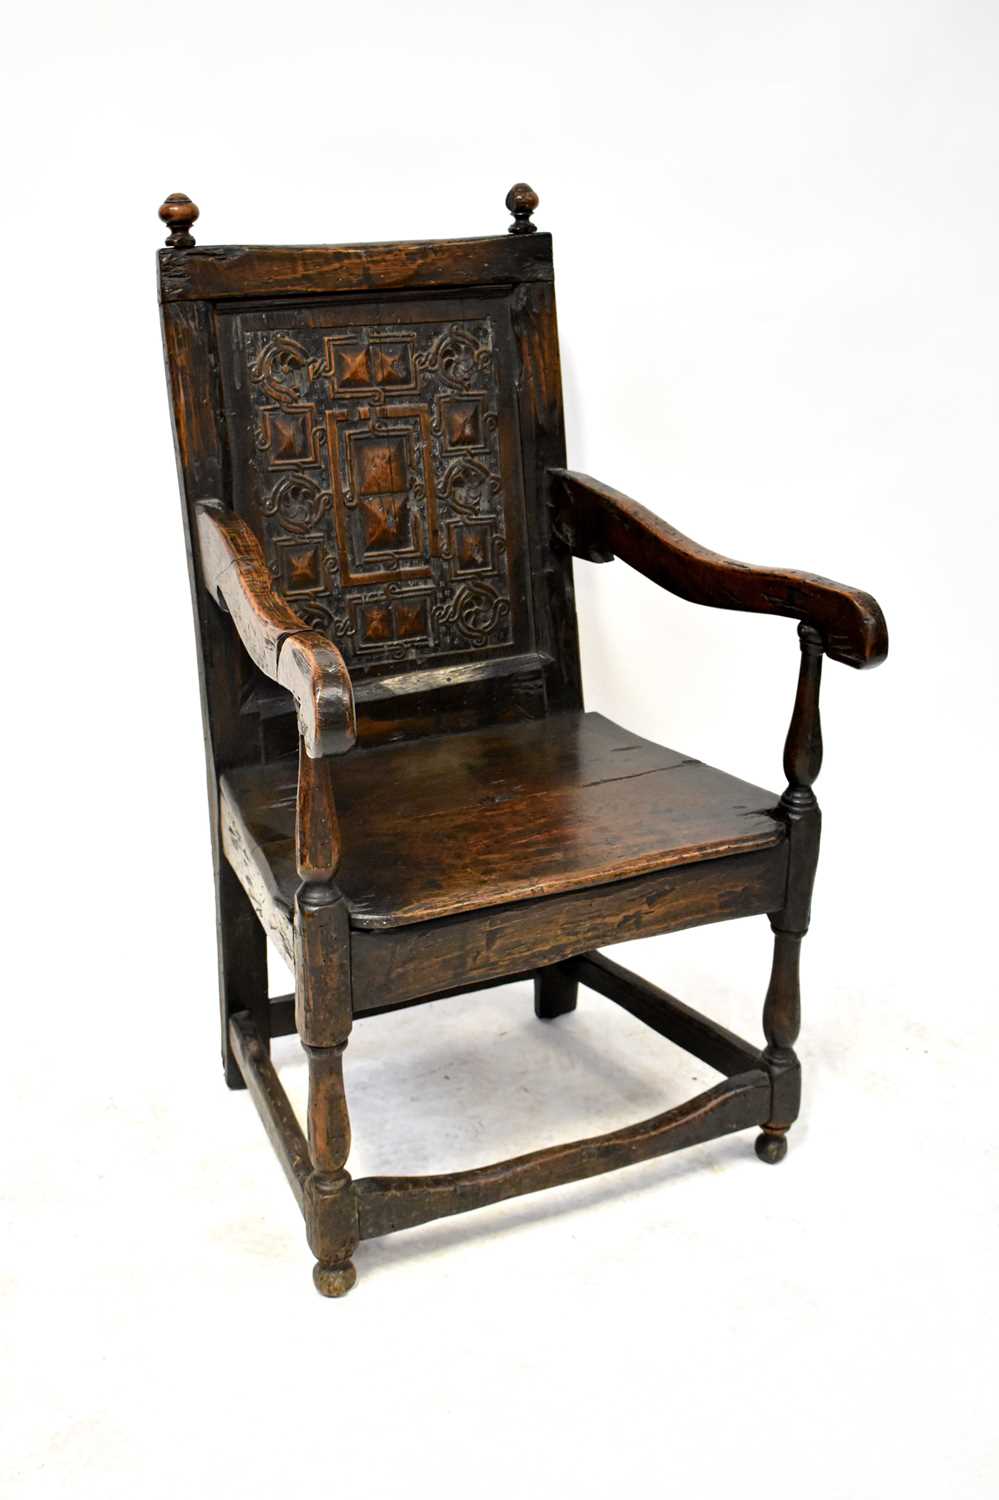 A 17th century and later Wainscot type open armchair with corner finials to the top, panel back